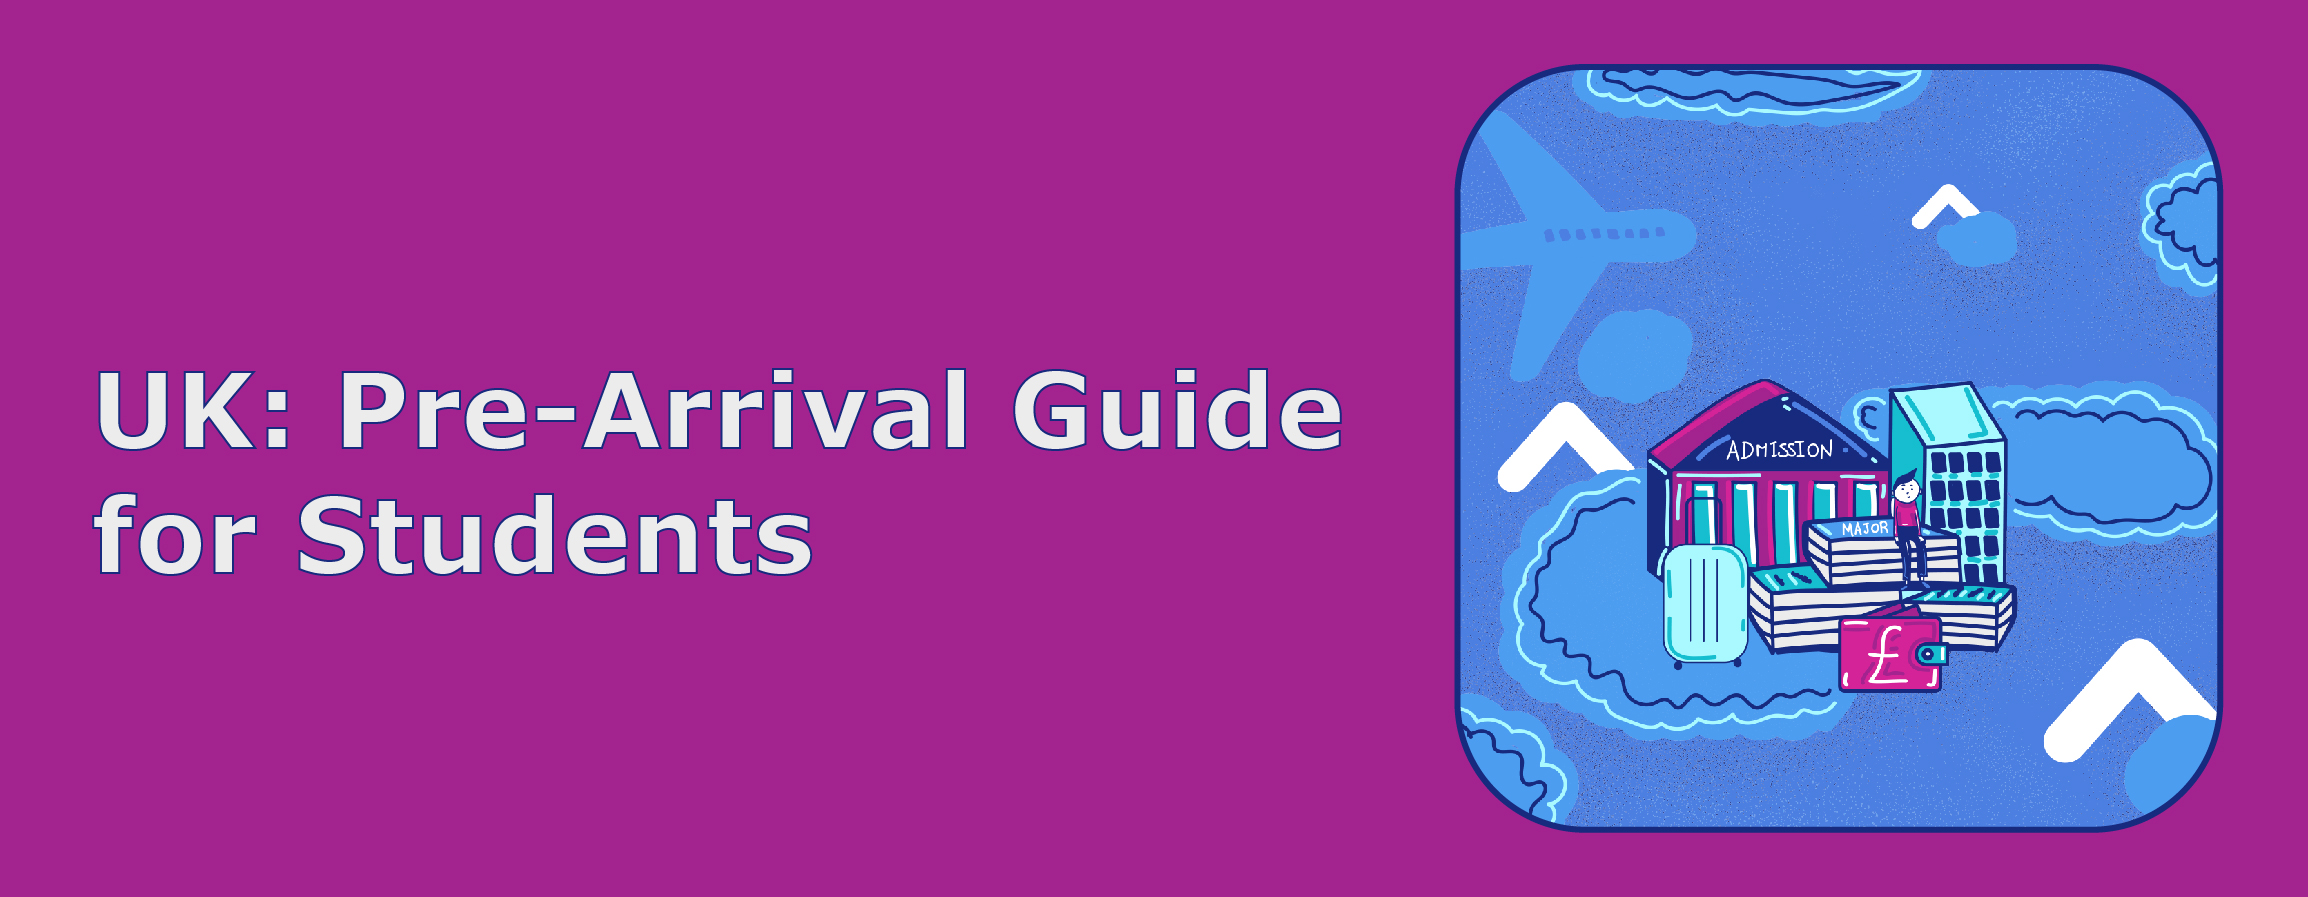 UK: Pre-Arrival Guide for Students